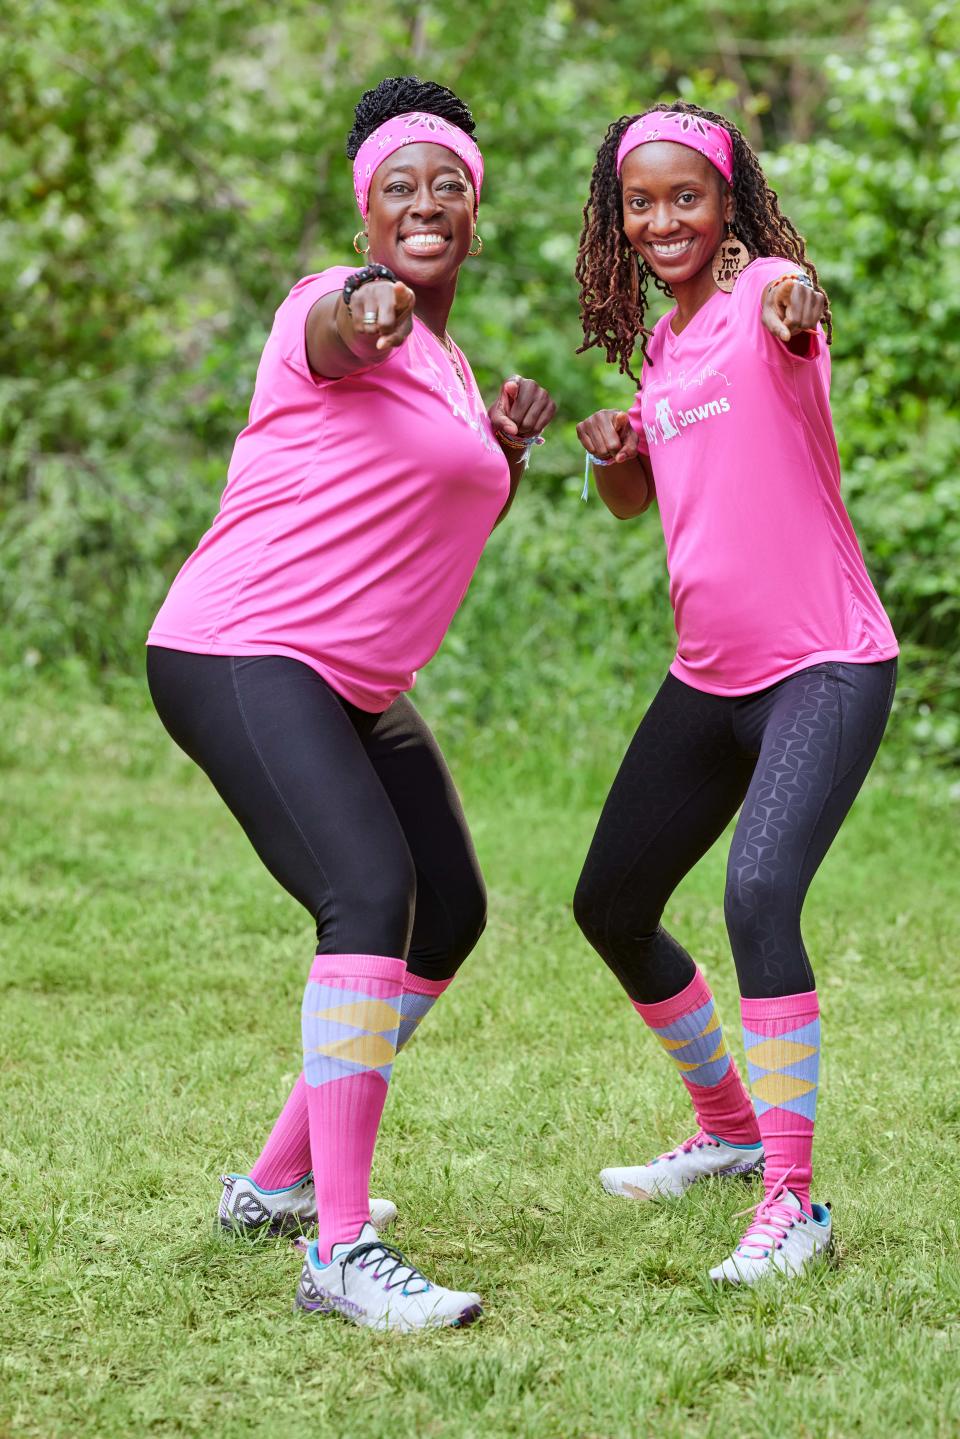 Best friends Malaina Hatcher and Andrea Simpson will compete in Season 35 of "The Amazing Race."